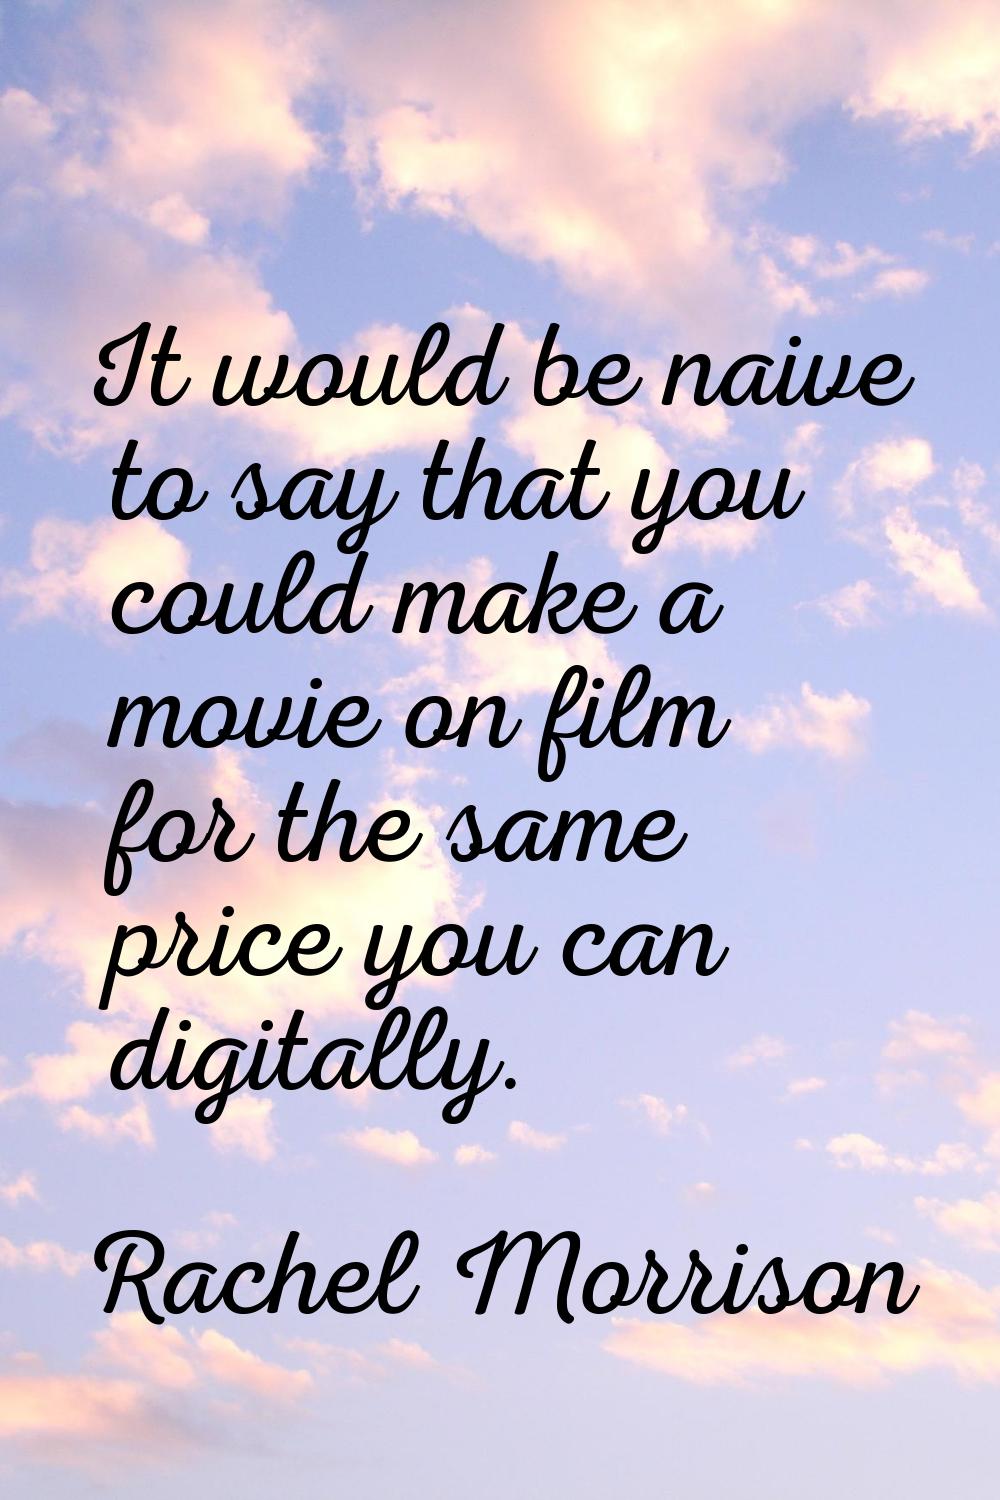 It would be naive to say that you could make a movie on film for the same price you can digitally.